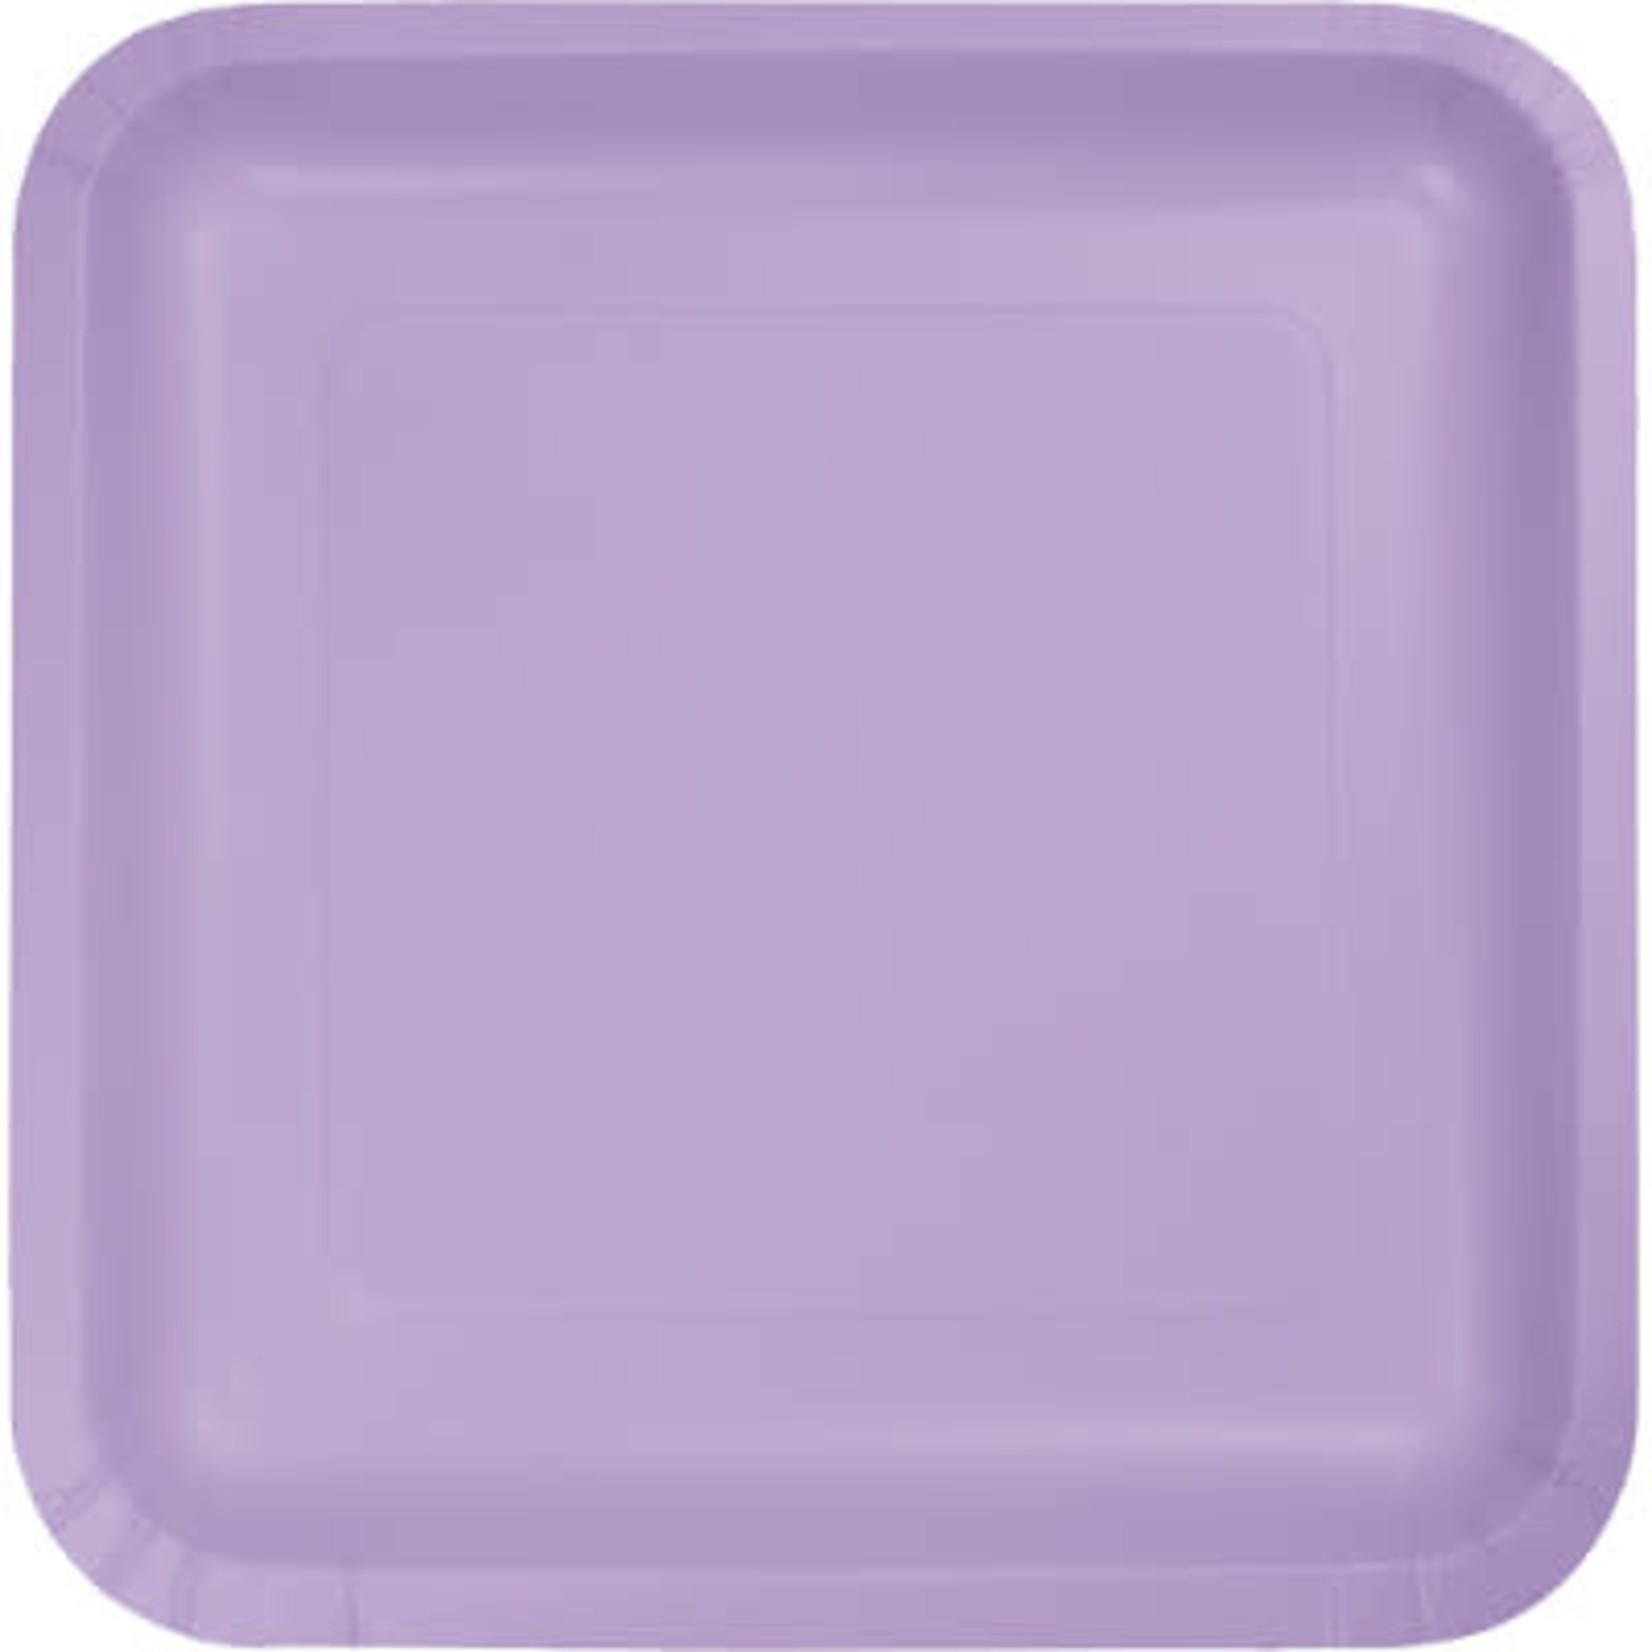 Touch of Color 7" Lavender Square Paper Plates - 24ct.